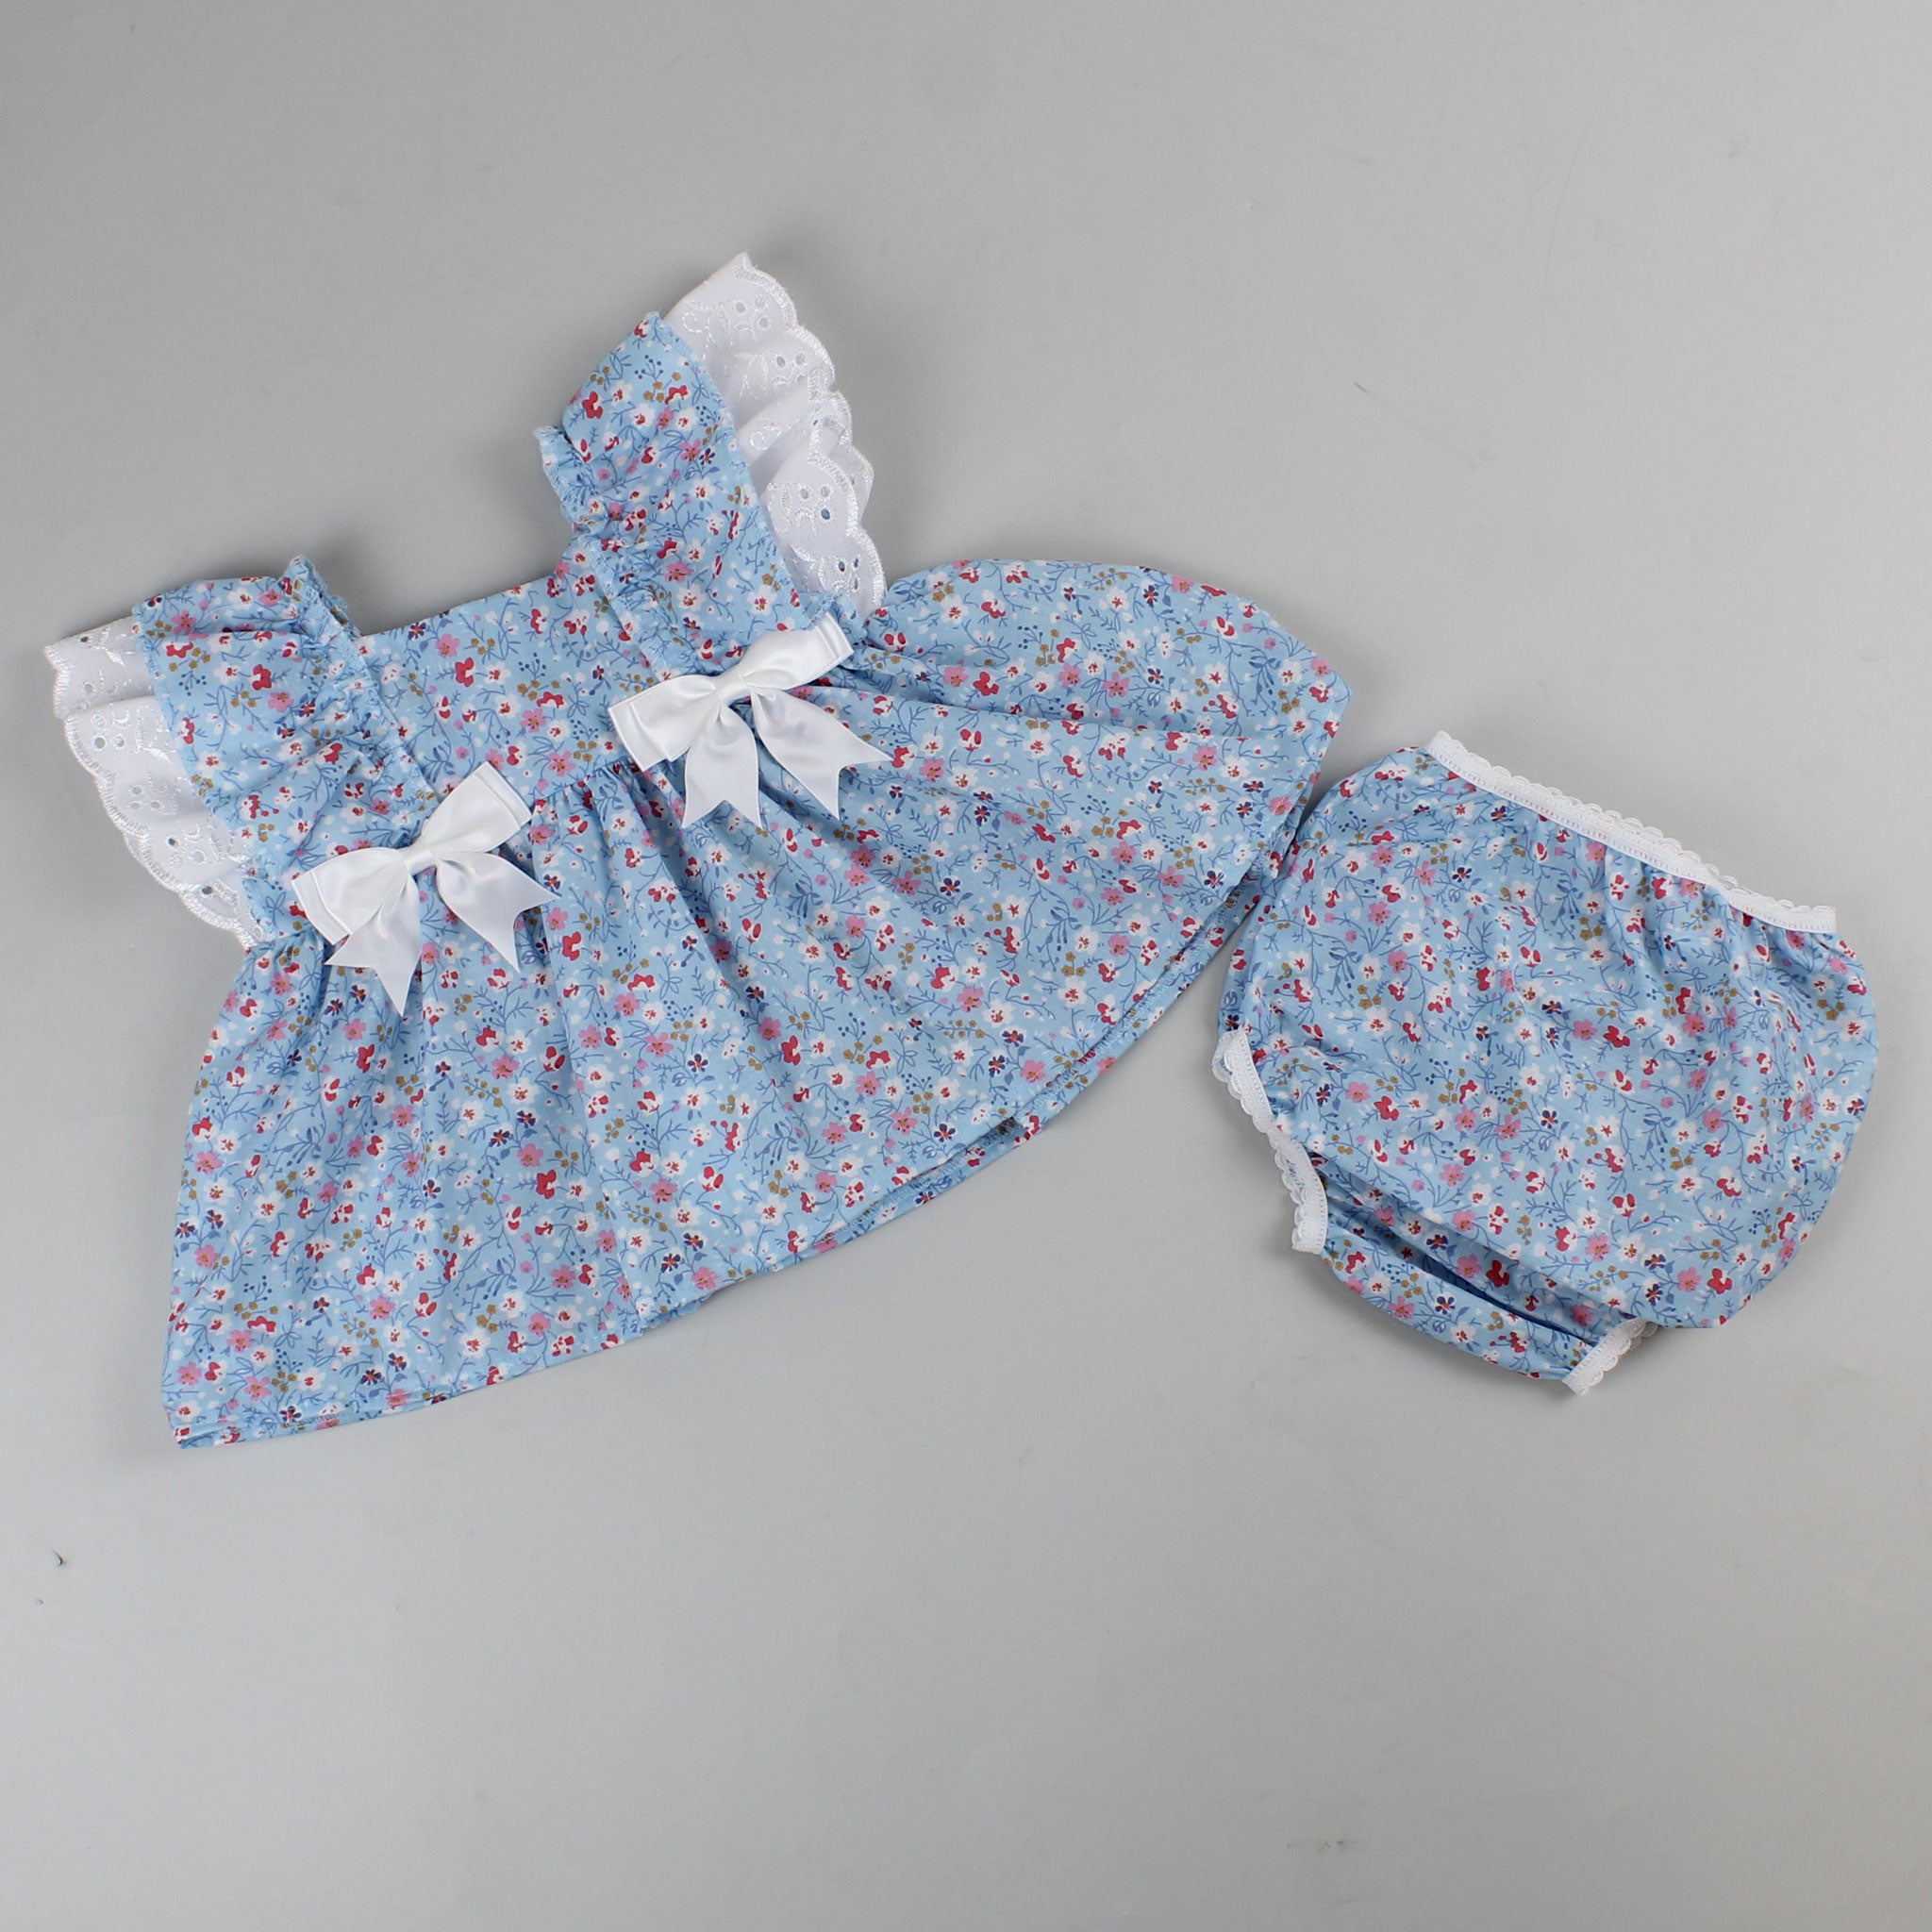 Baby Girl Dress & Bloomers - Blue Floral Print